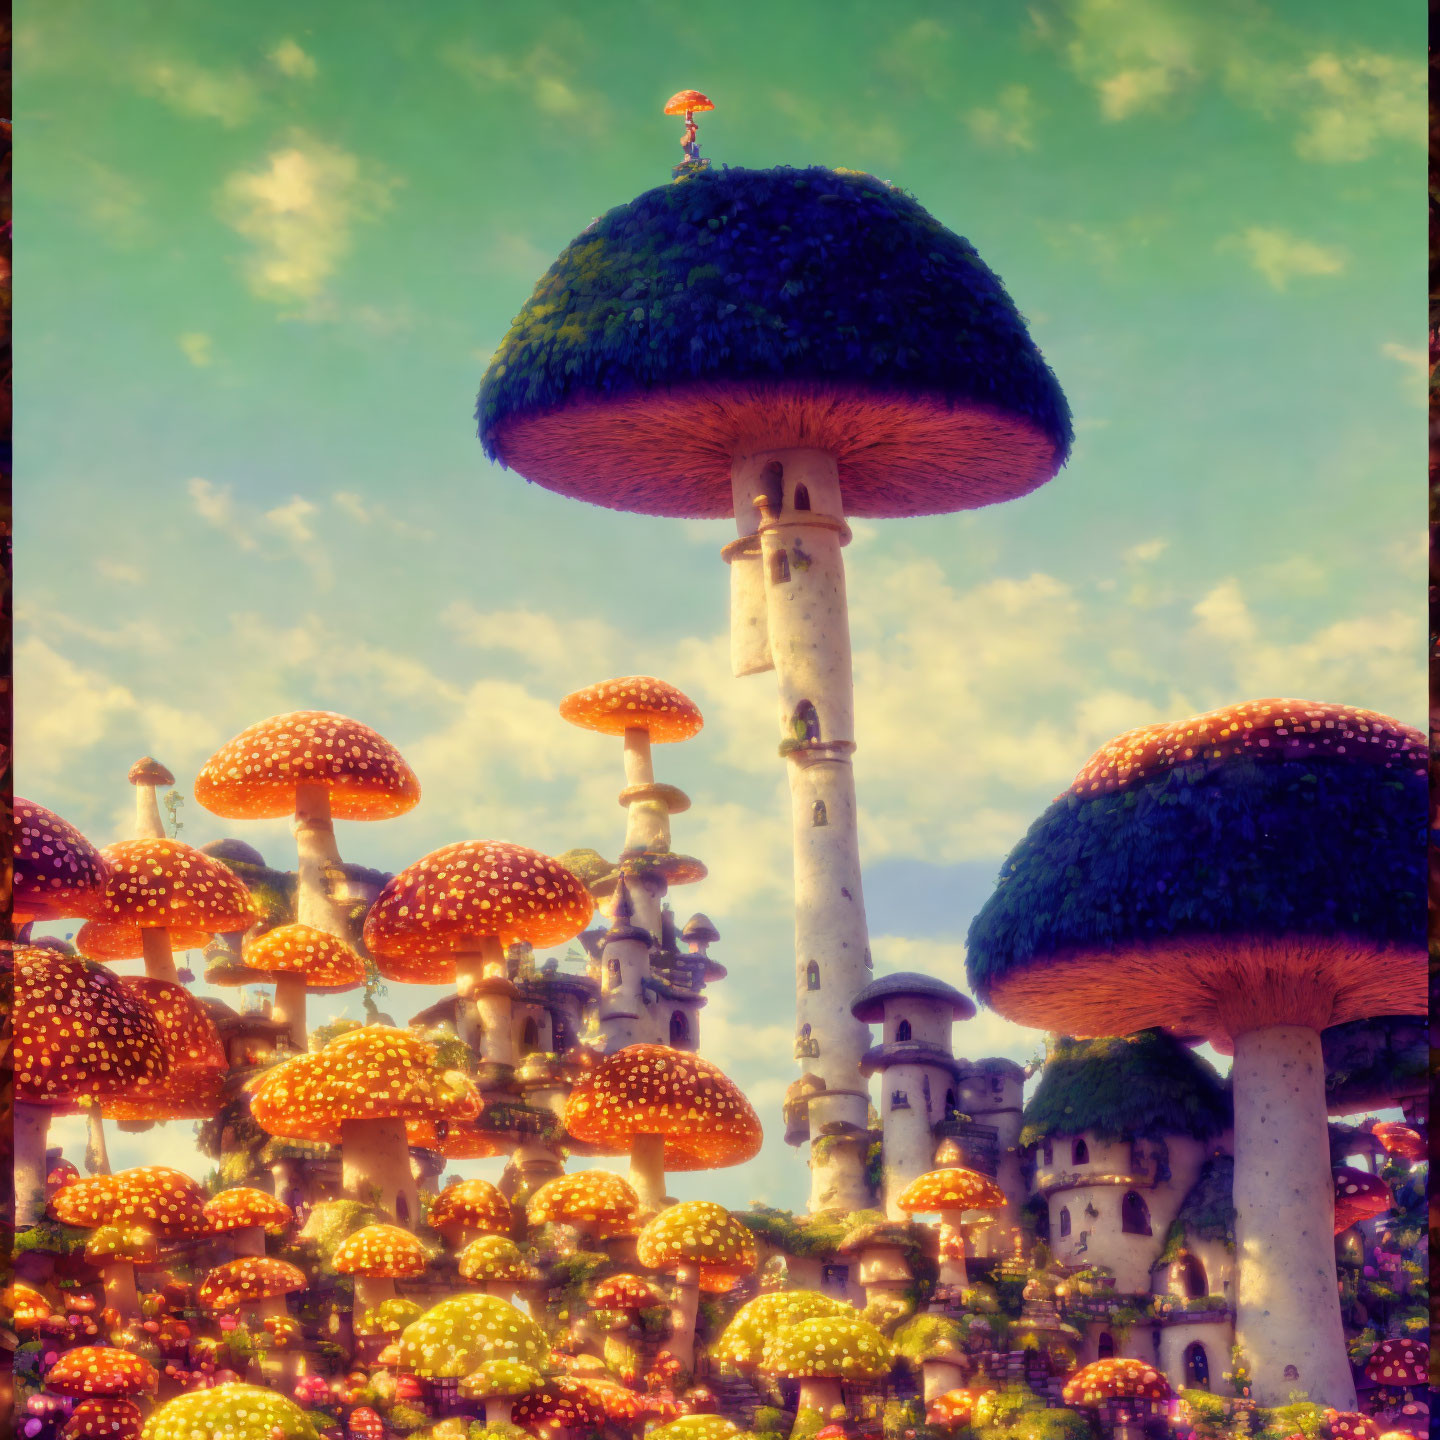 Whimsical landscape with towering mushroom structures under dreamy sky